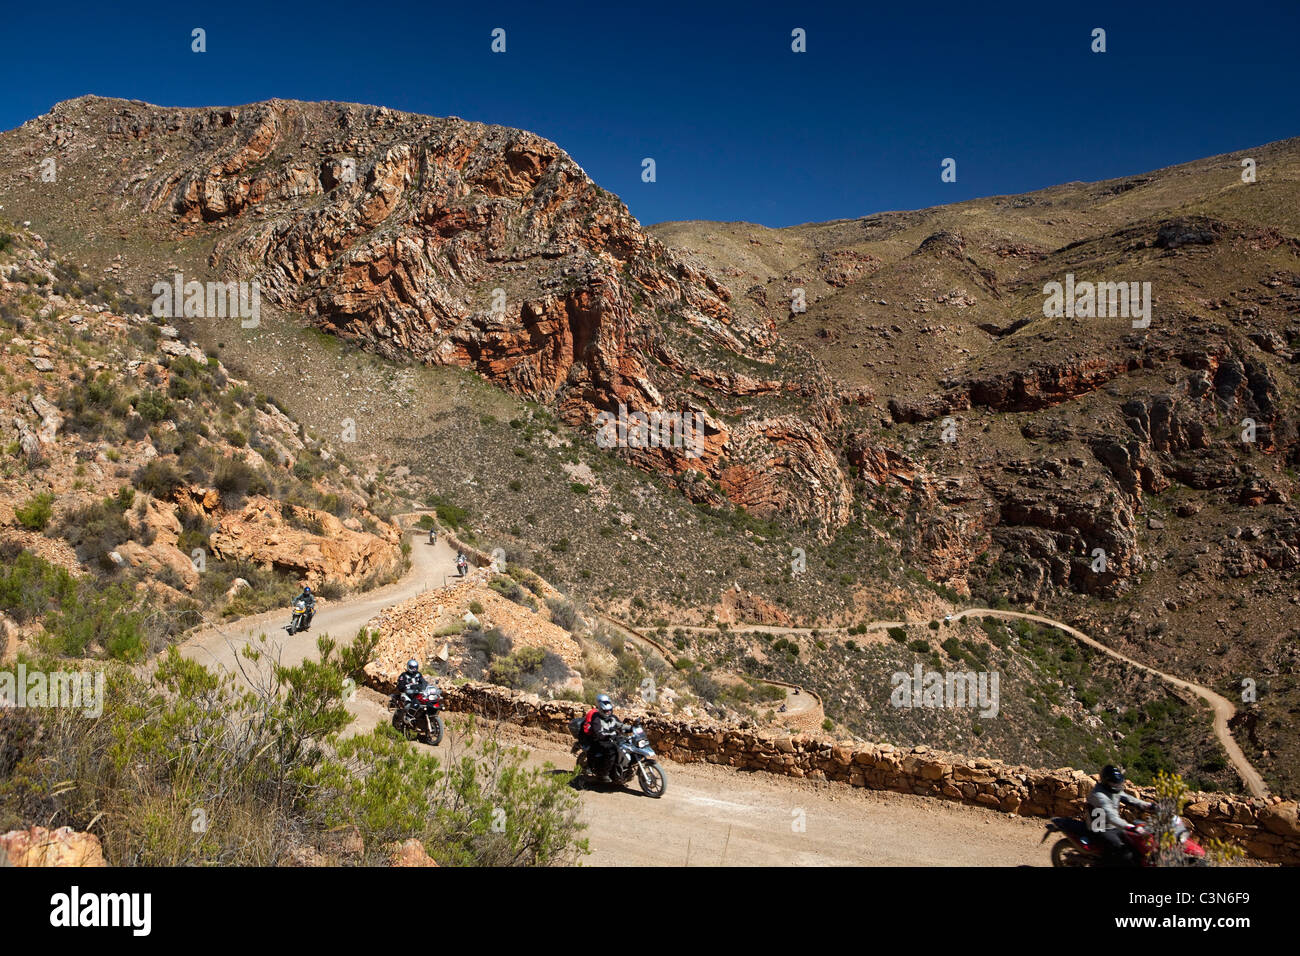 South Africa, Western Cape, Prince Albert, Swartberg Pass. Motorcycles. Stock Photo